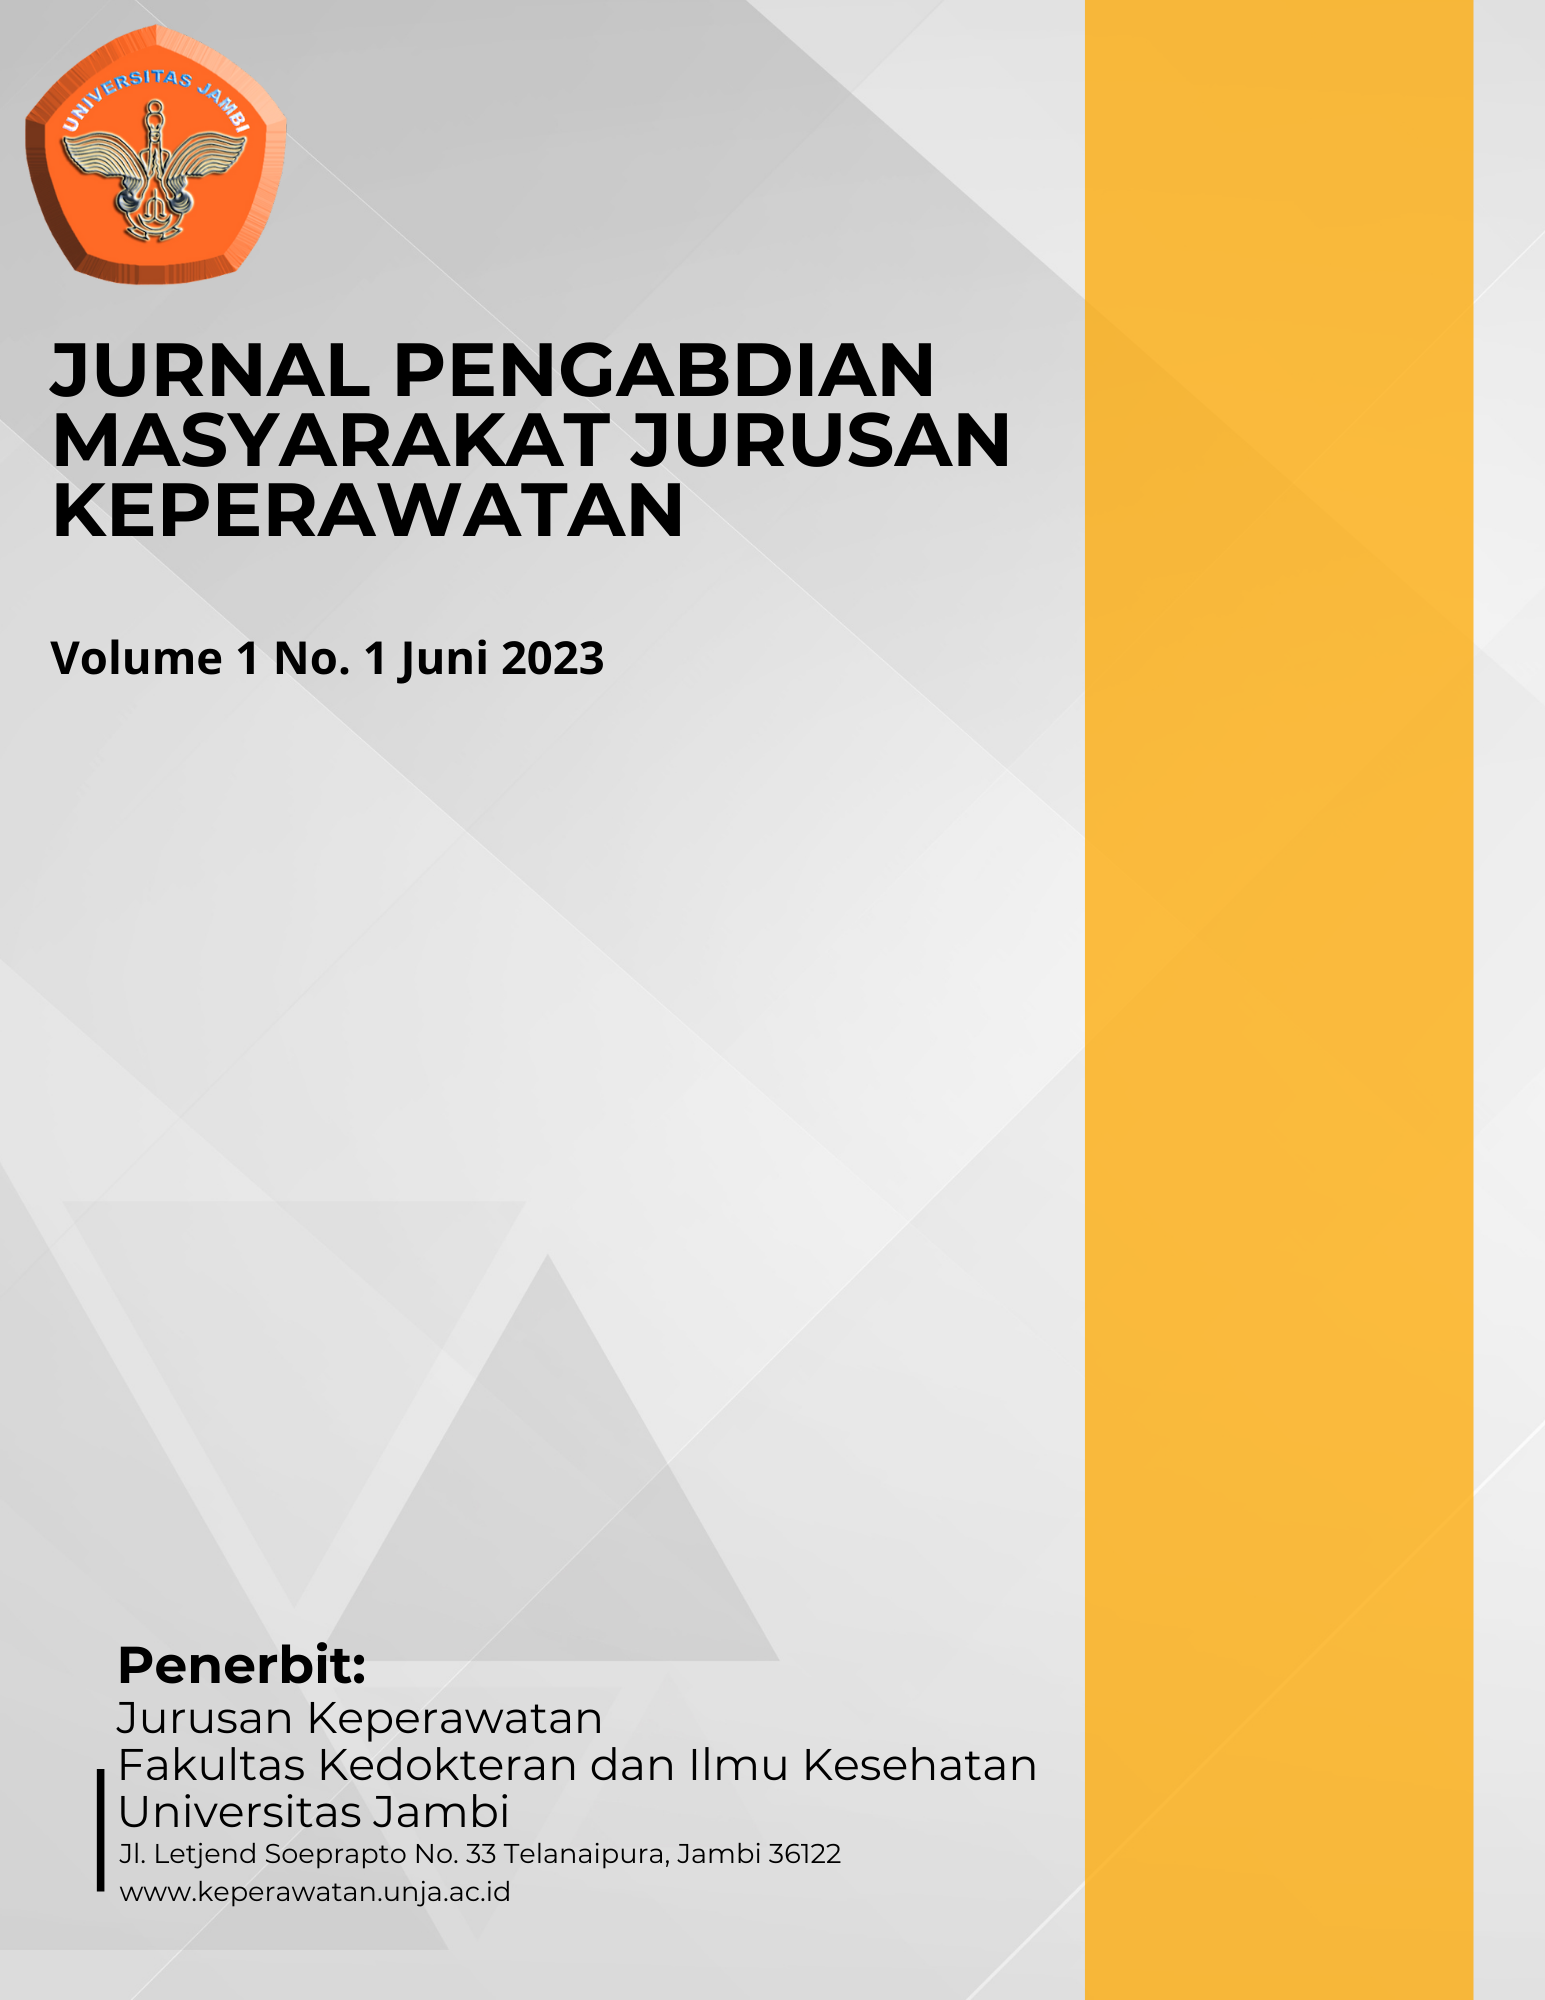 Jurnal Pengabdian Masyarakat Jurusan Keperawatan (JPMJK) is an open access that which is published by Nursing Science Study Program - Medical Faculty and Health Science Jambi University publish twice a years in June and December with a total of five articles in each publication.